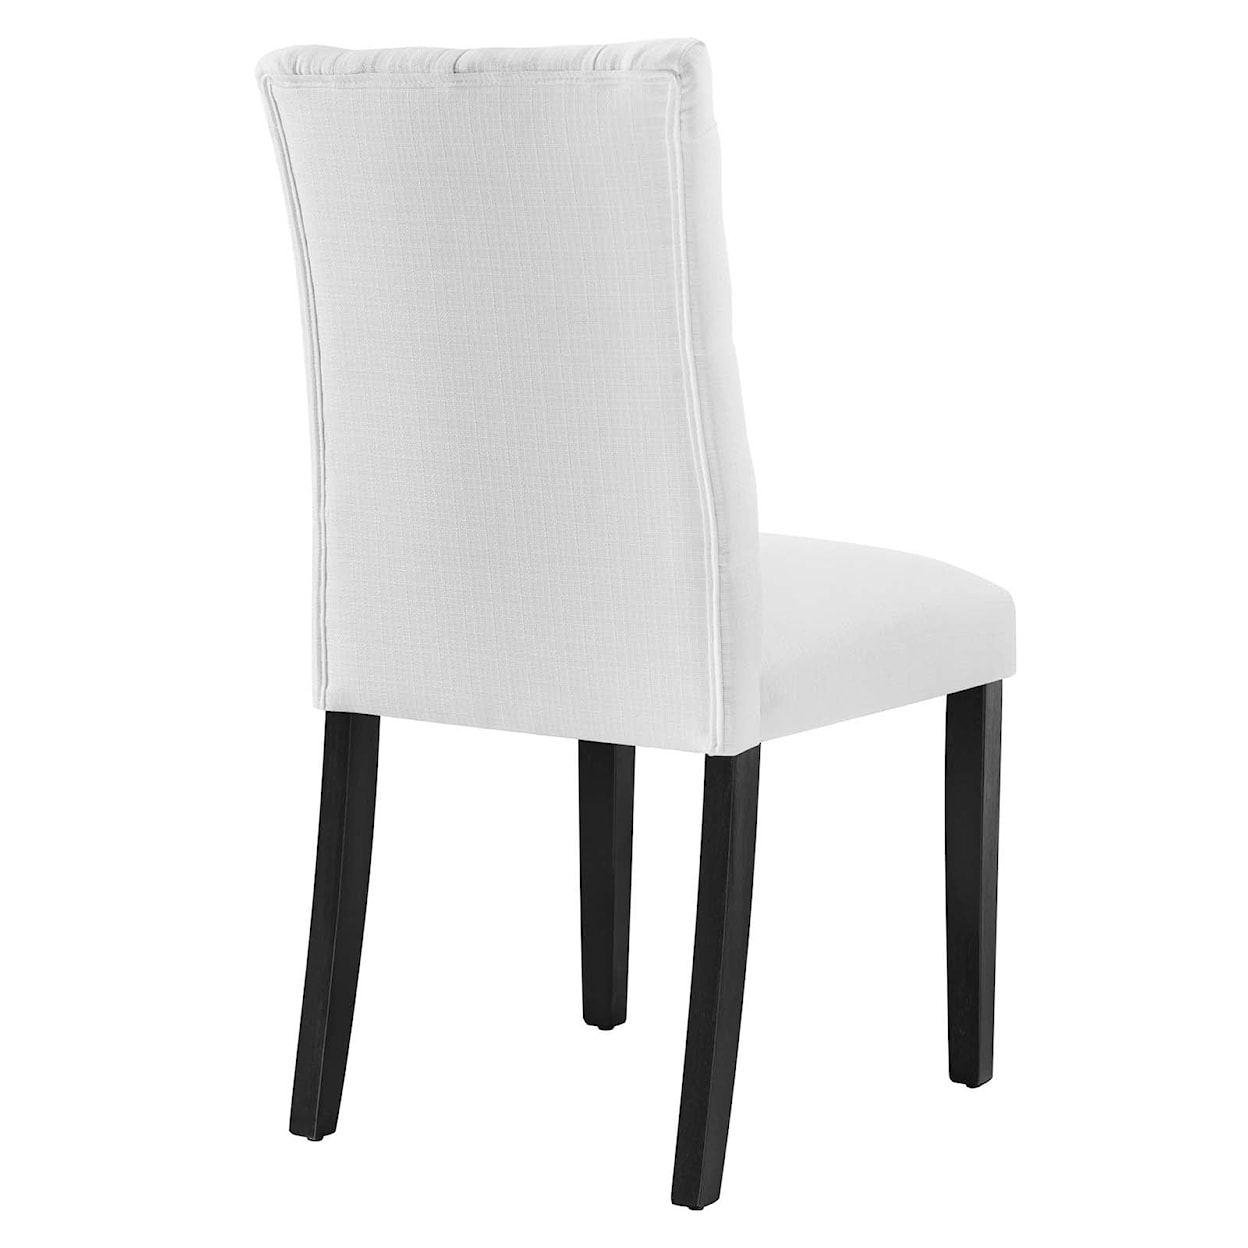 Modway Duchess Set of 2 Upholstered Dining Chairs